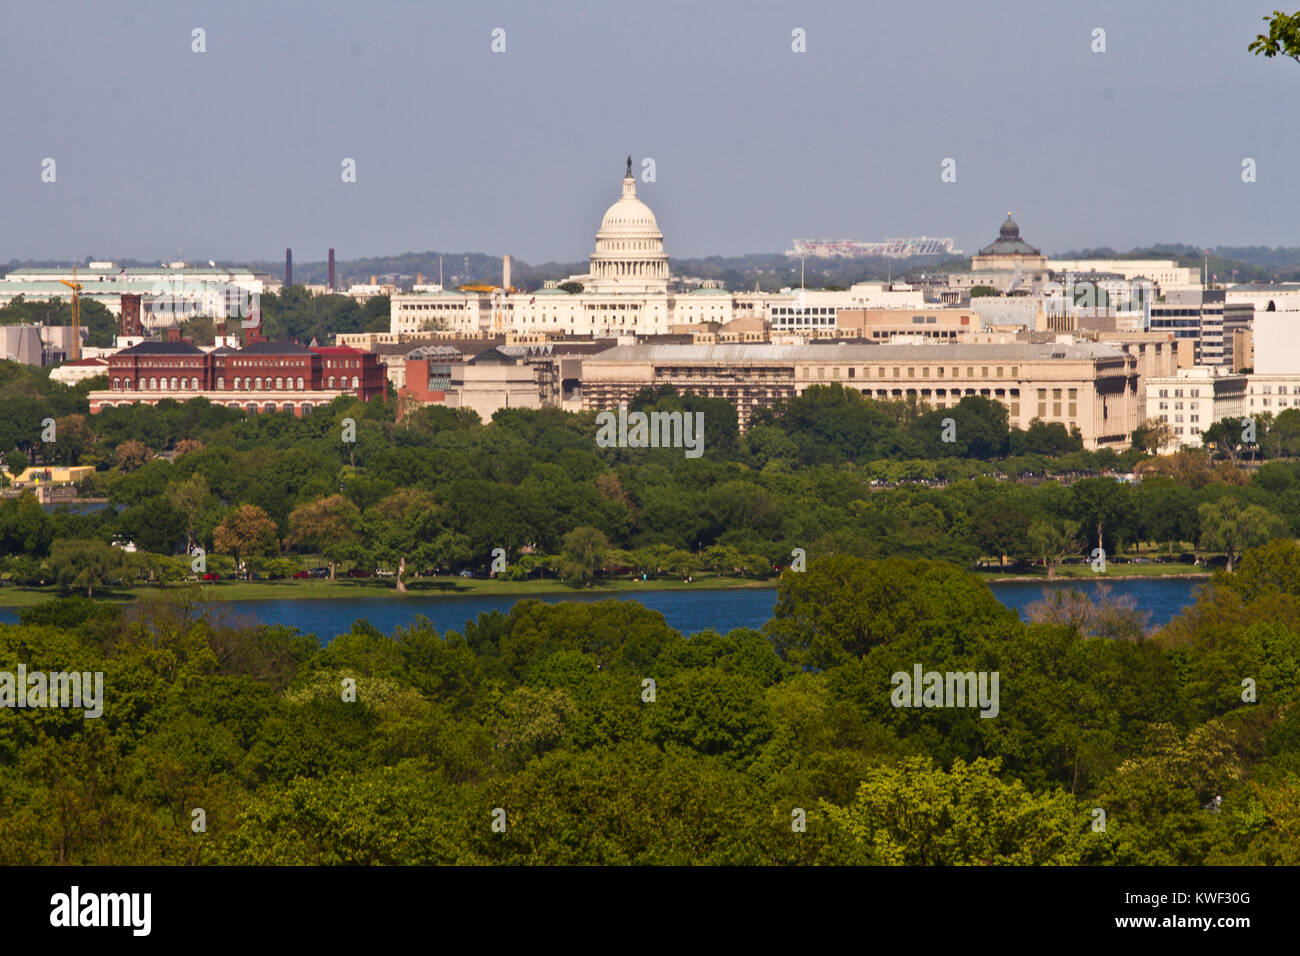 United States Capitol Building, Washington DC, is the home of the US Congress, and the seat of the legislative branch of the U.S. federal government. Stock Photo